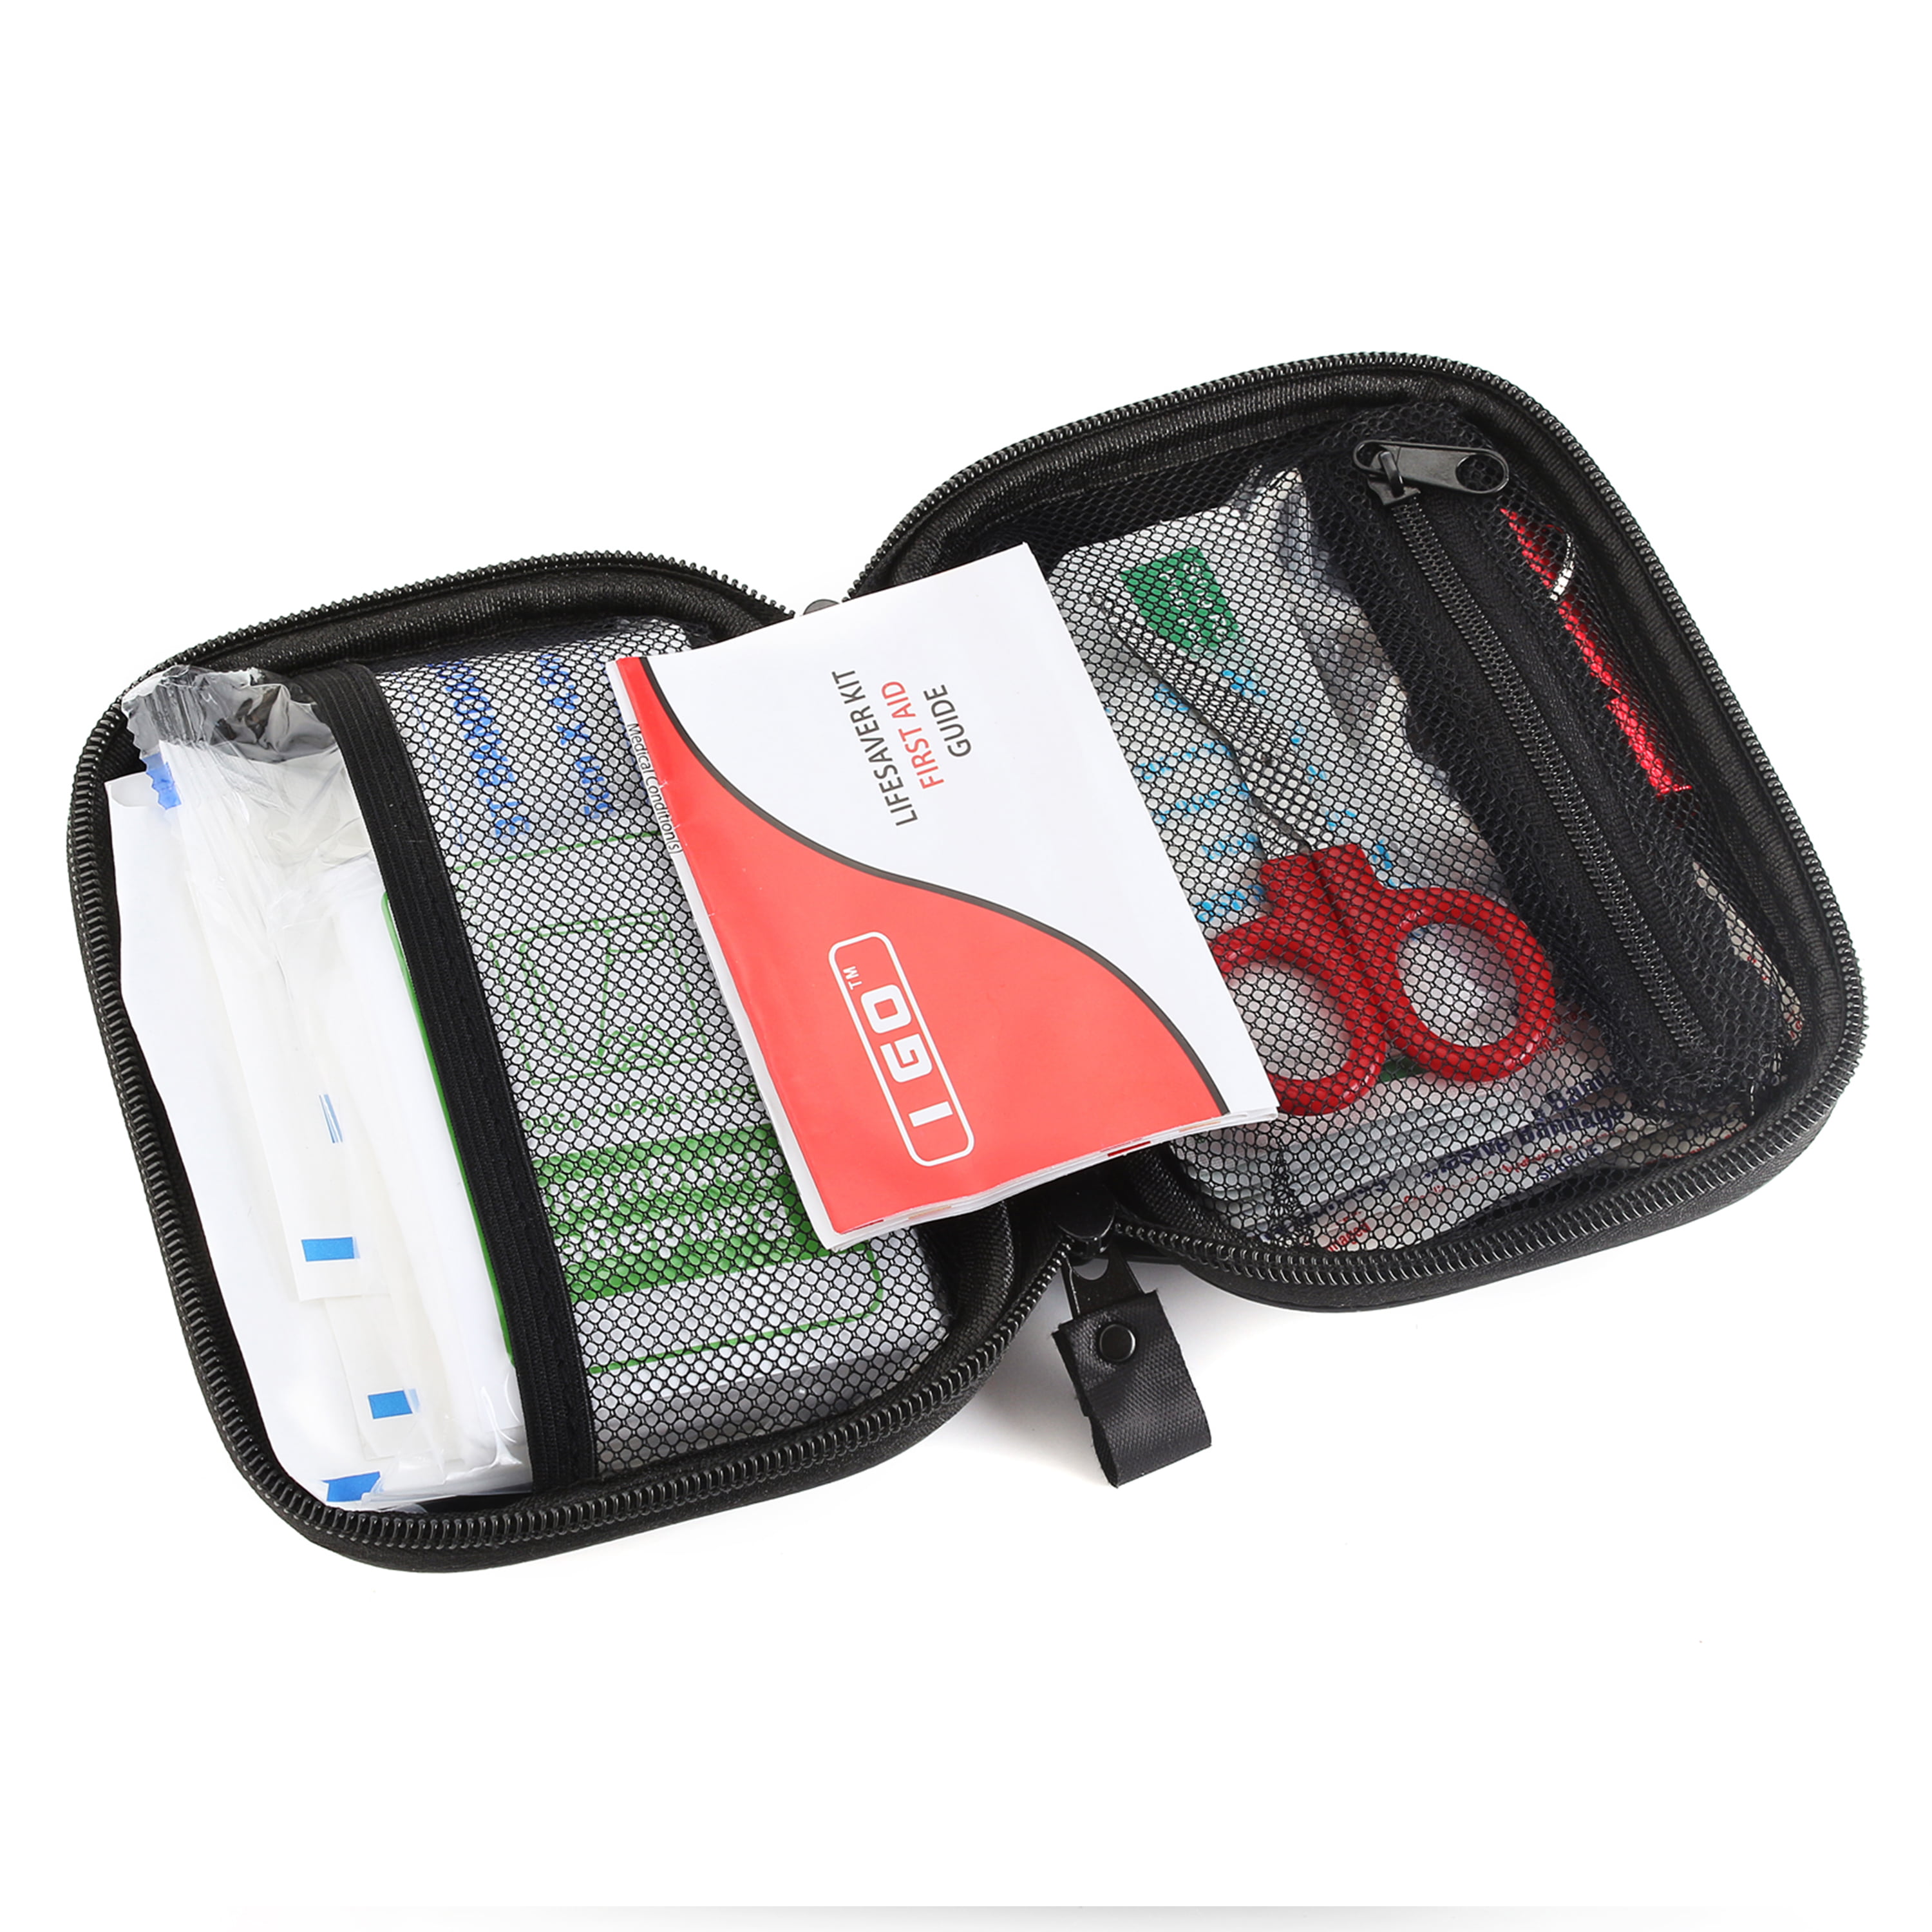 I Go (85 Piece) First Aid Kit Emergency Supplies Pack, Zip Small Travel  Size Case For Car, Home Or Camping Safety, for Sports, Camping, Hiking,  Sporting Good Events, Hunting, Fishing, Backpacking 